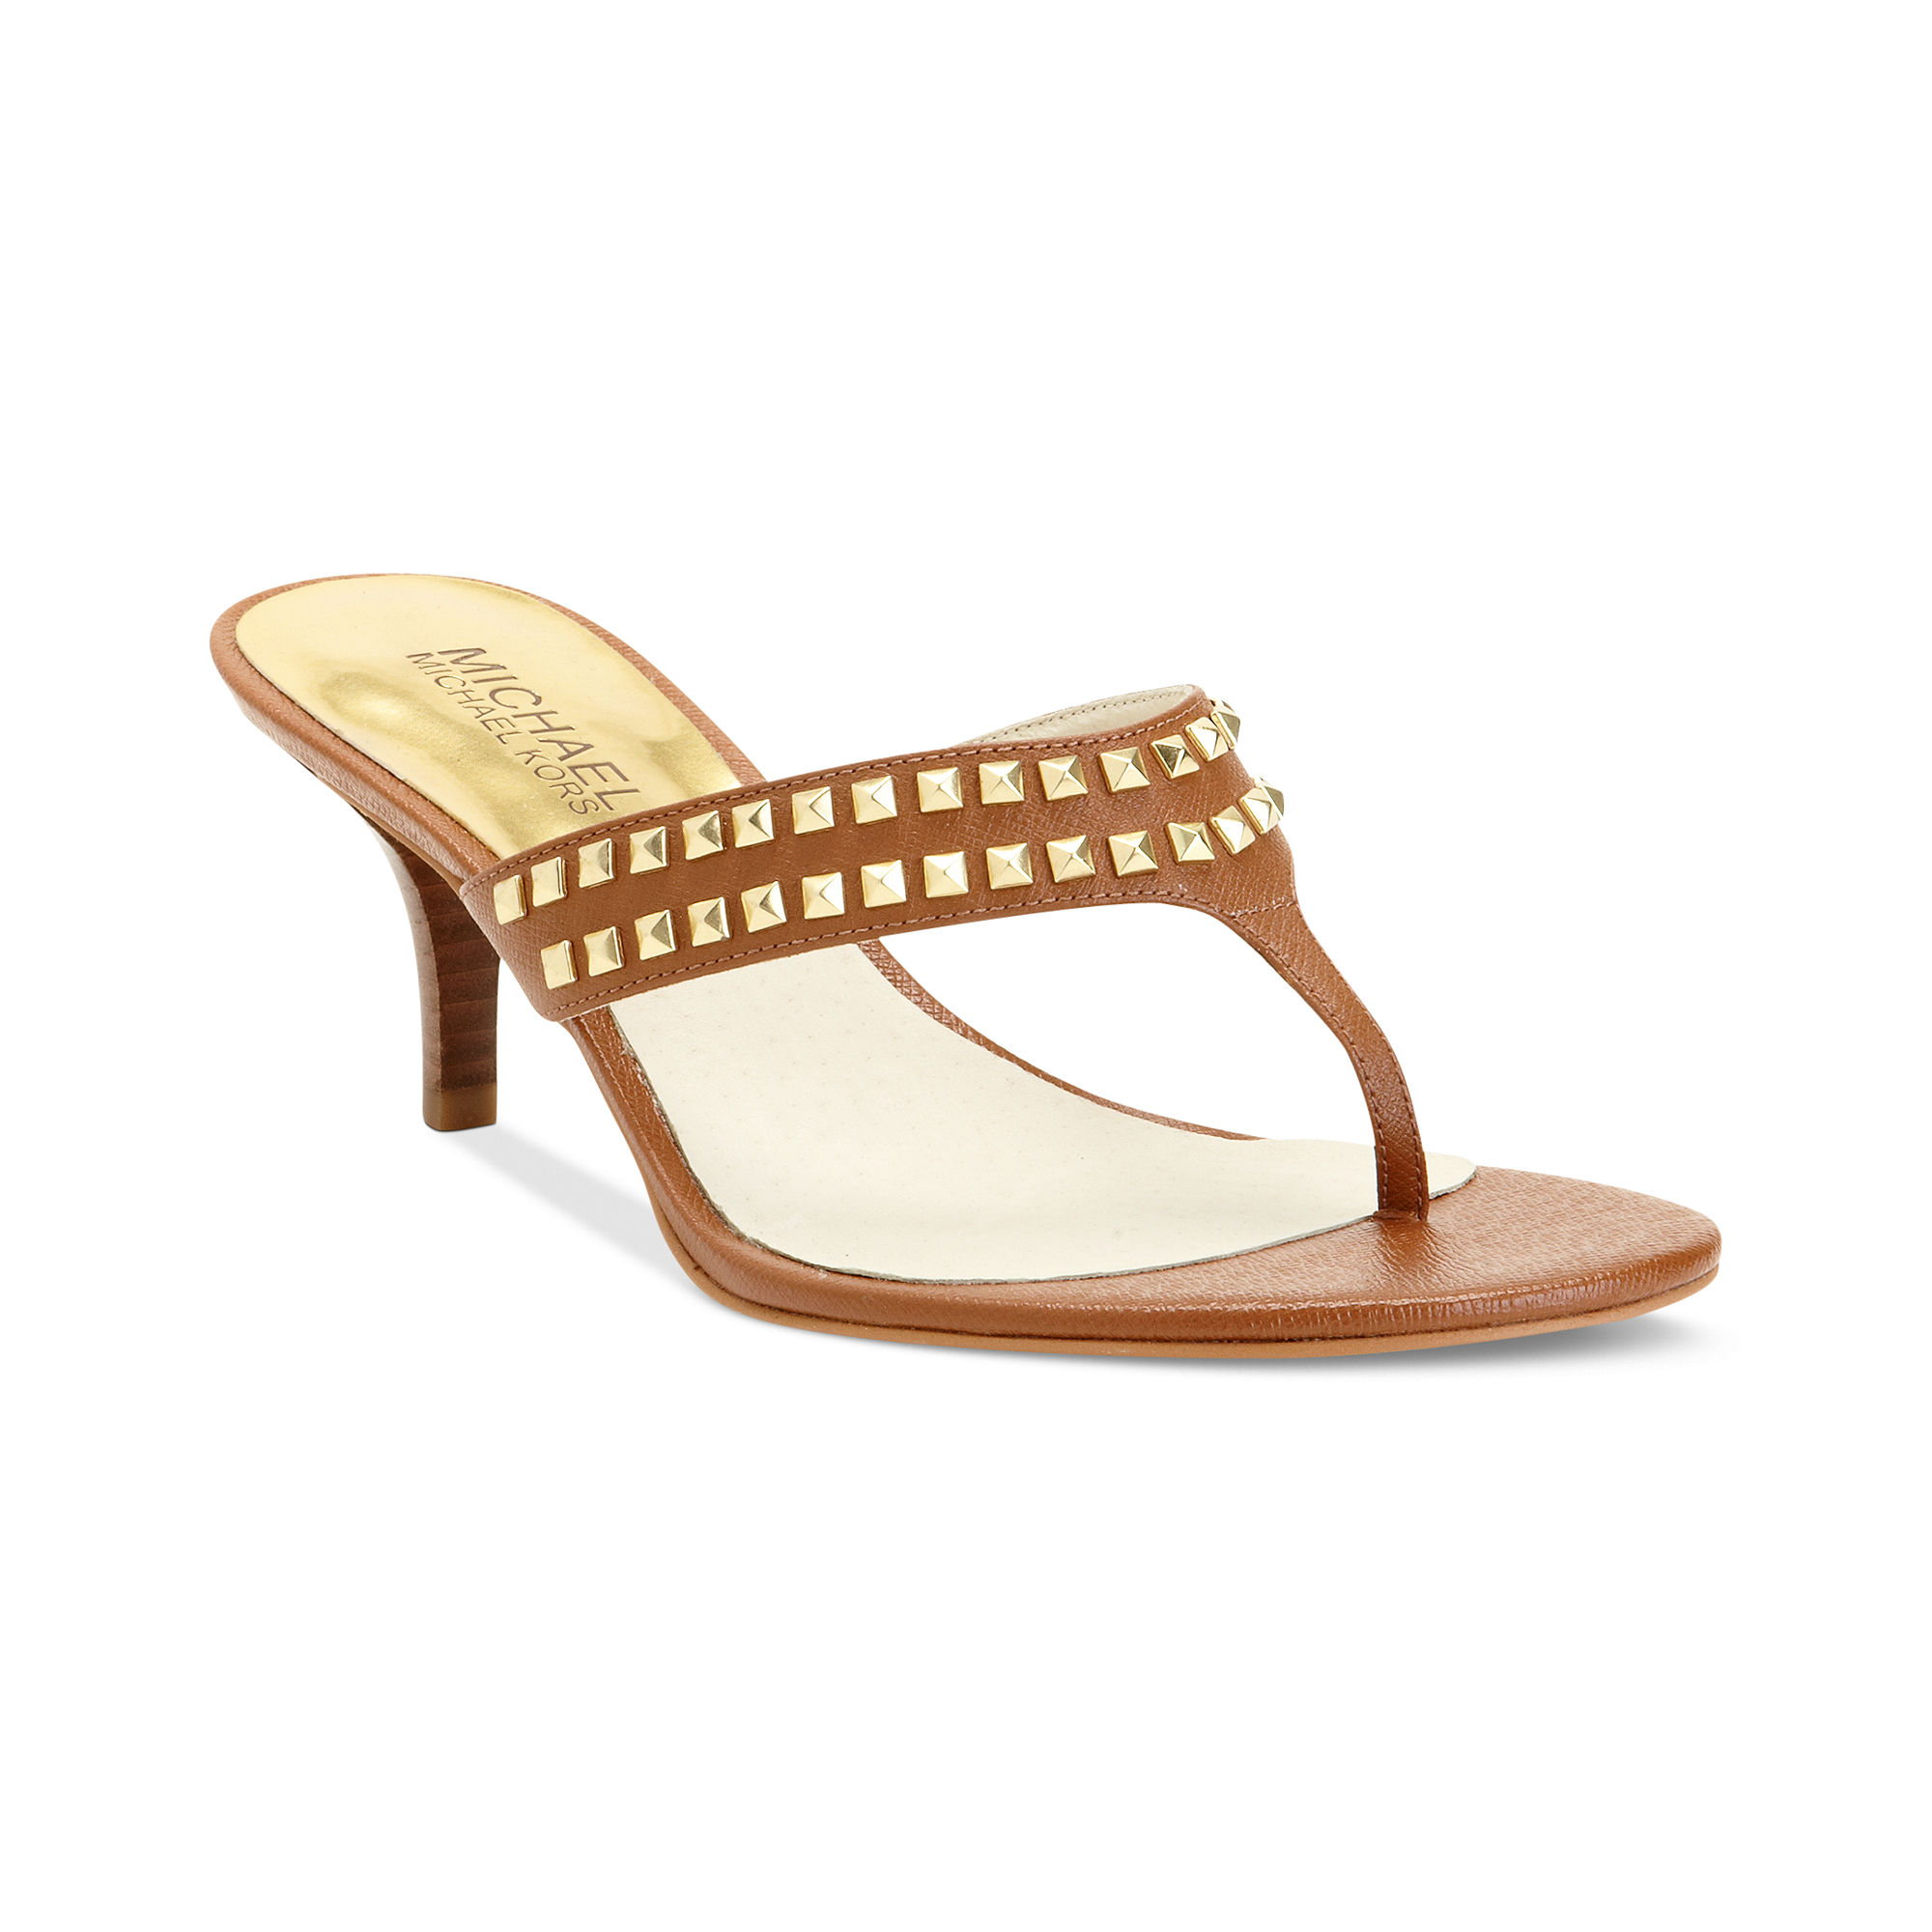 Michael Kors Alexi Mid Heel Thong Sandals in Yellow (luggage) | Lyst